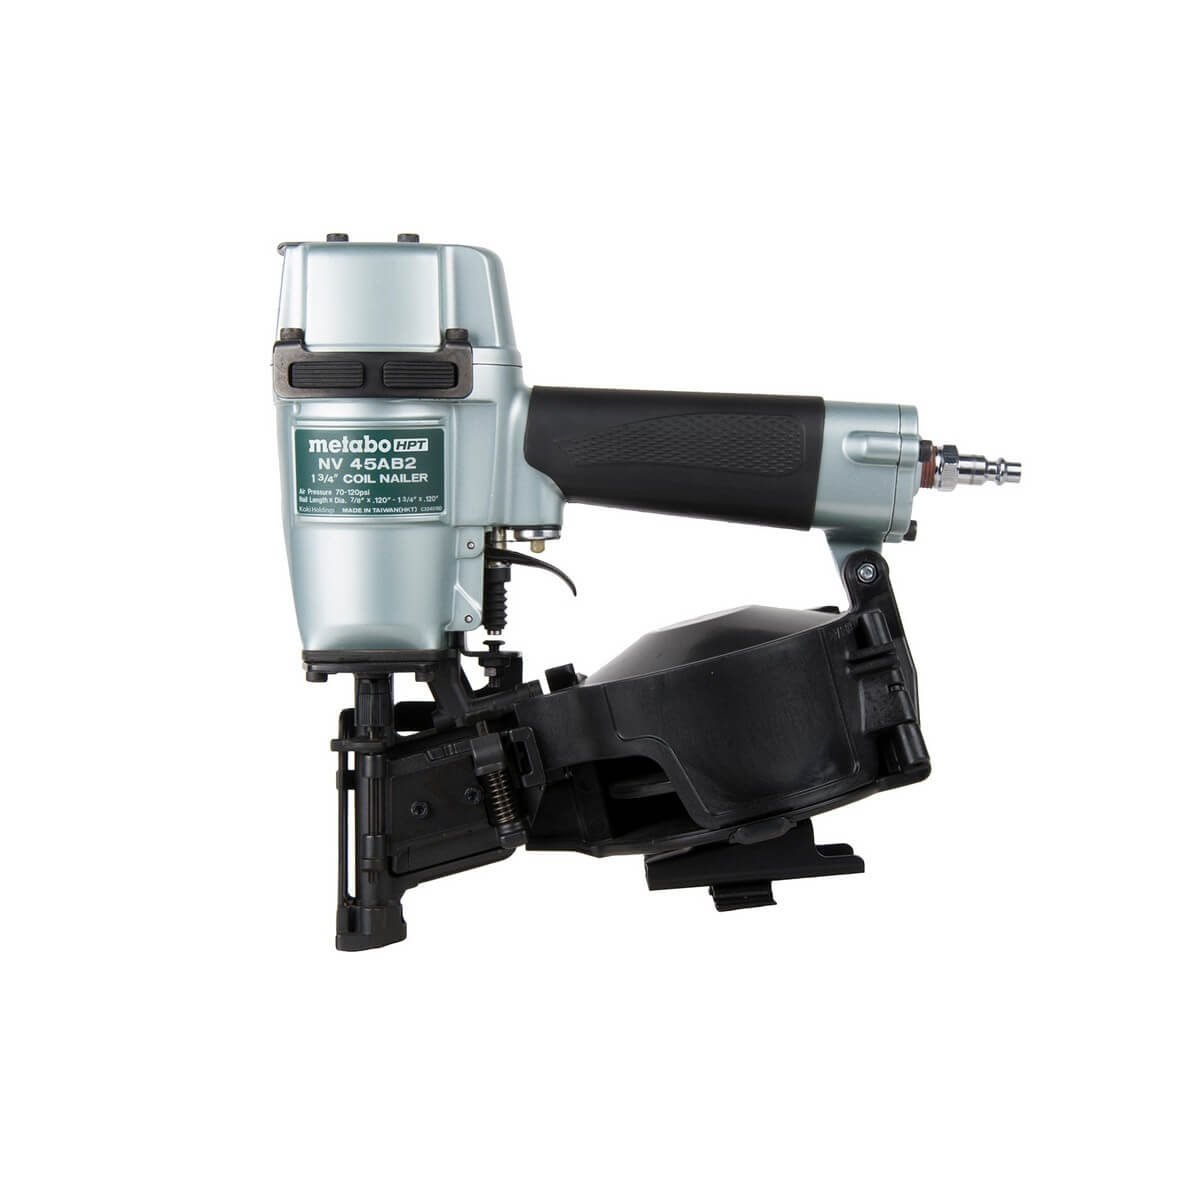 Metabo NV45AB2 7/8-Inch to 1-3/4-Inch Coil Roofing Nailer